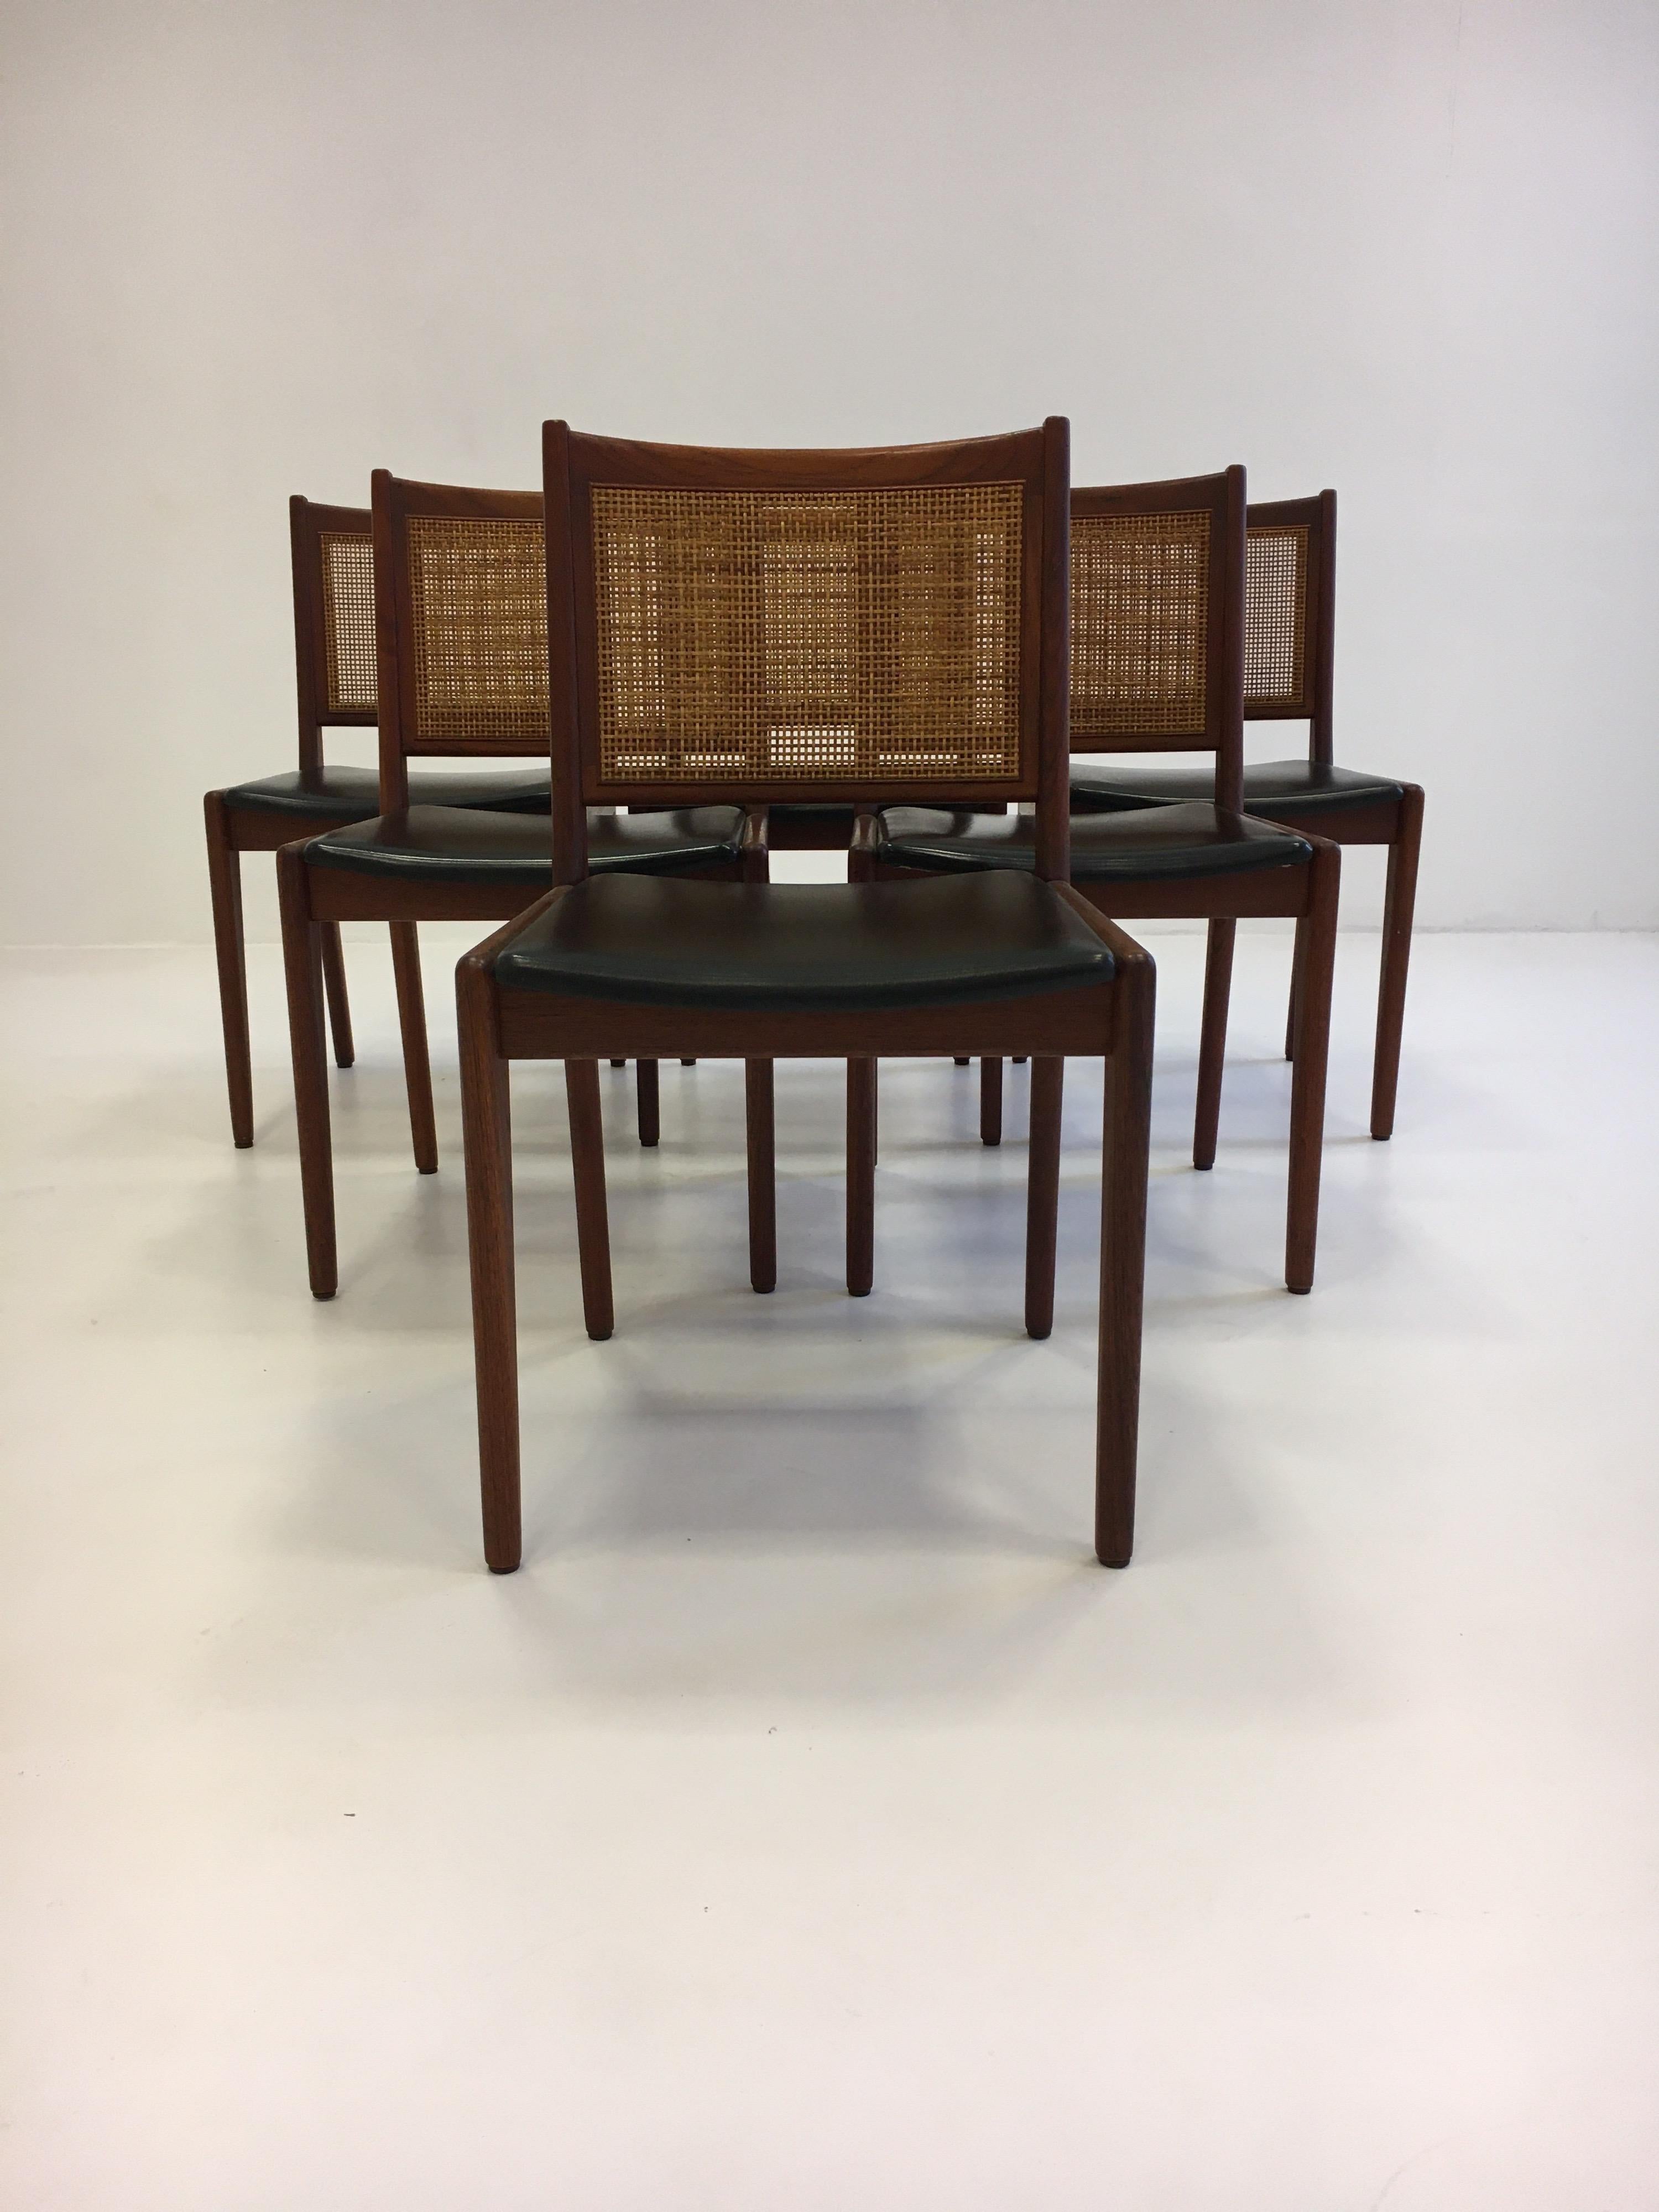 Karl-Erik Ekselius set of six dining chairs in teak and cane, Sweden, 1950s. This set is designed by Karl-Erik Ekselius, which show influences of both Scandinavian and French modern design.